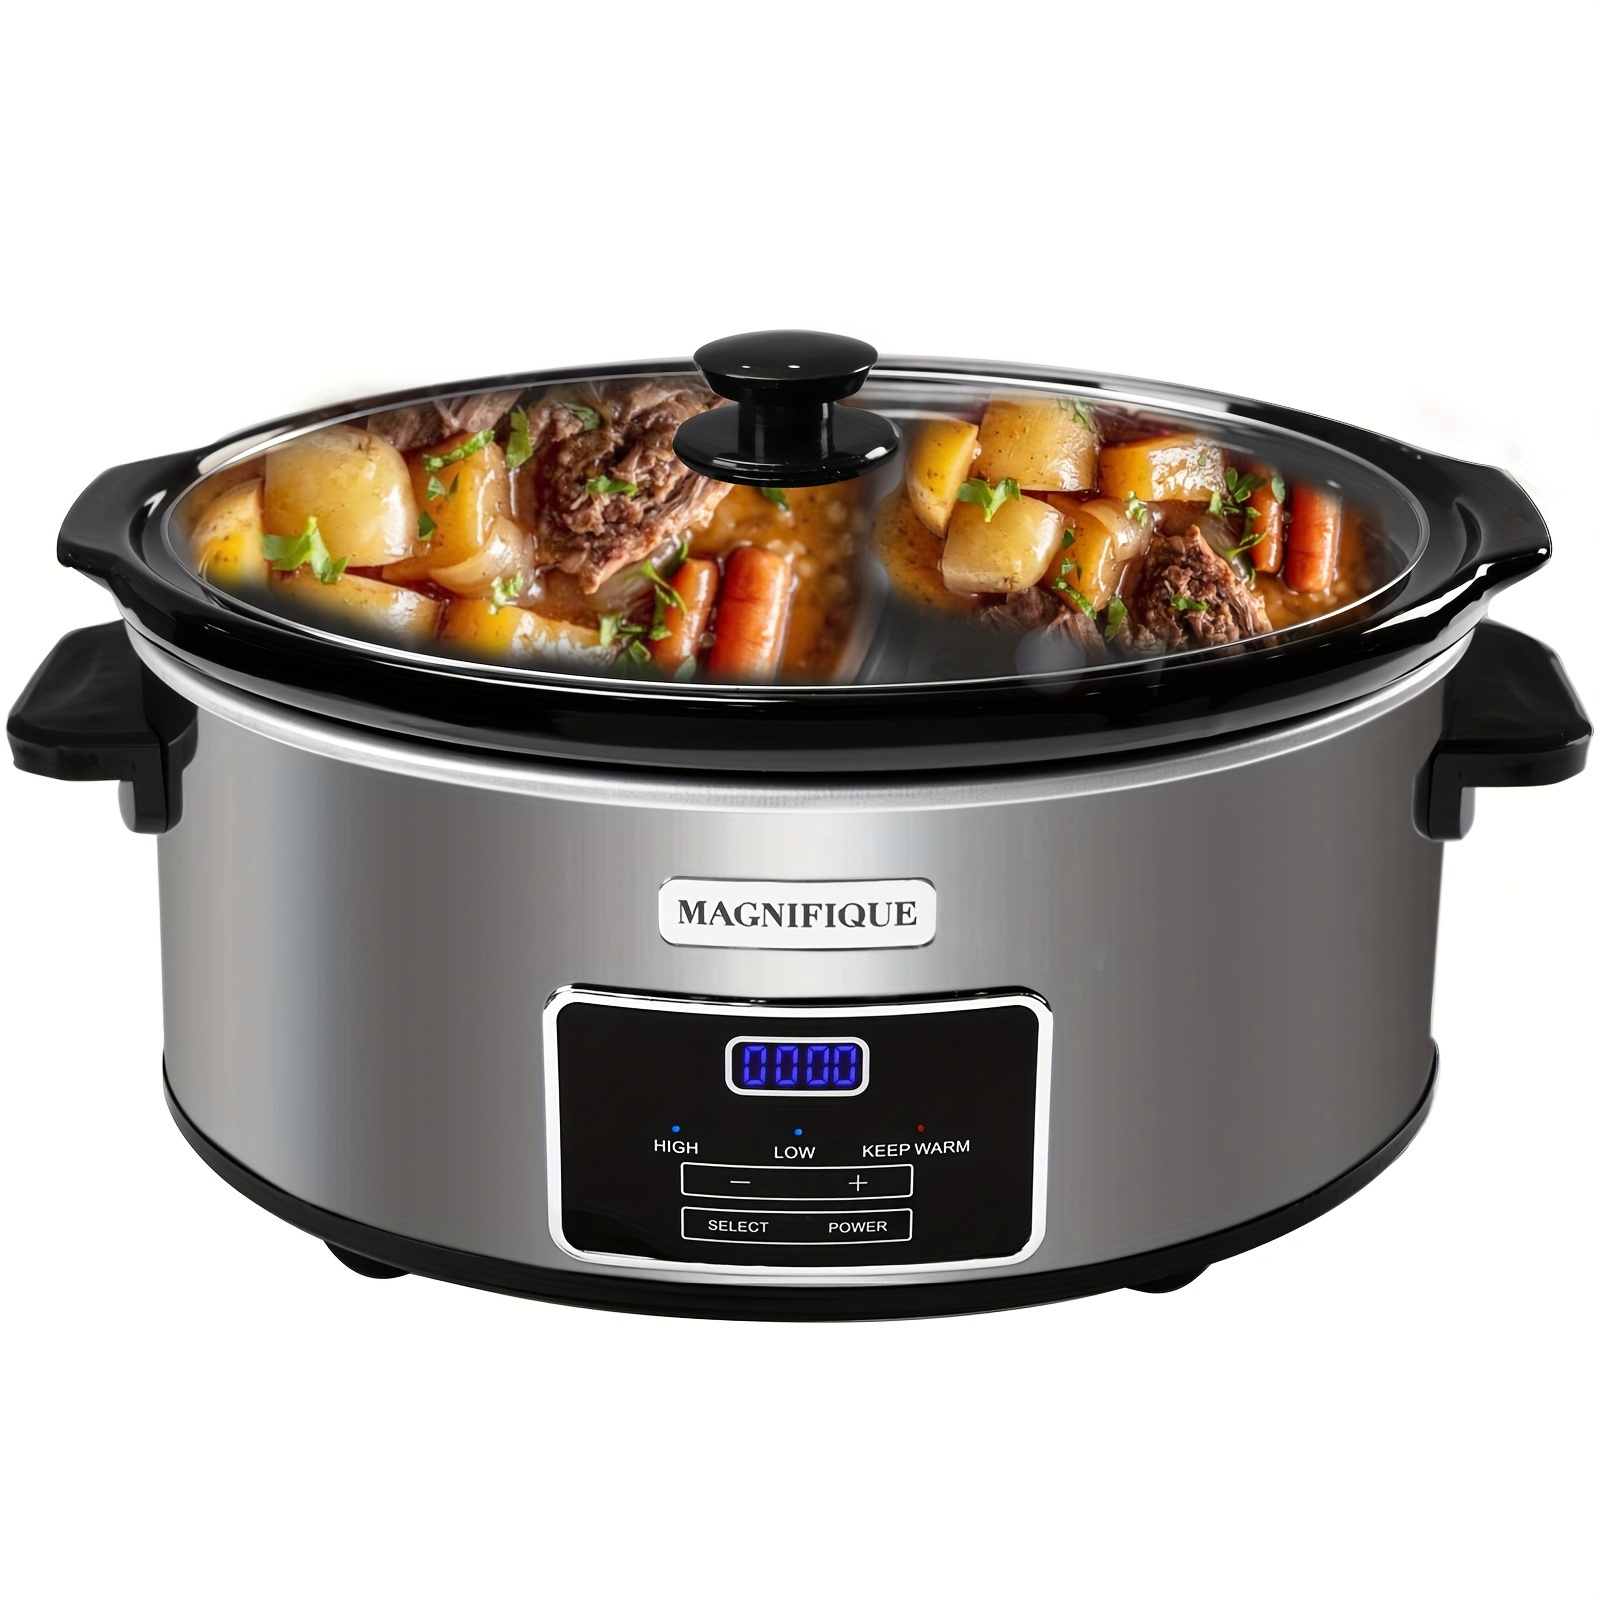 

1pc, Magnifique 7-quart Programmable Slow Cooker With Keep Warm Setting, Digital Timer - Perfect Kitchen Small Appliance For Family Dinners - Large Enough To Serve 8+ People